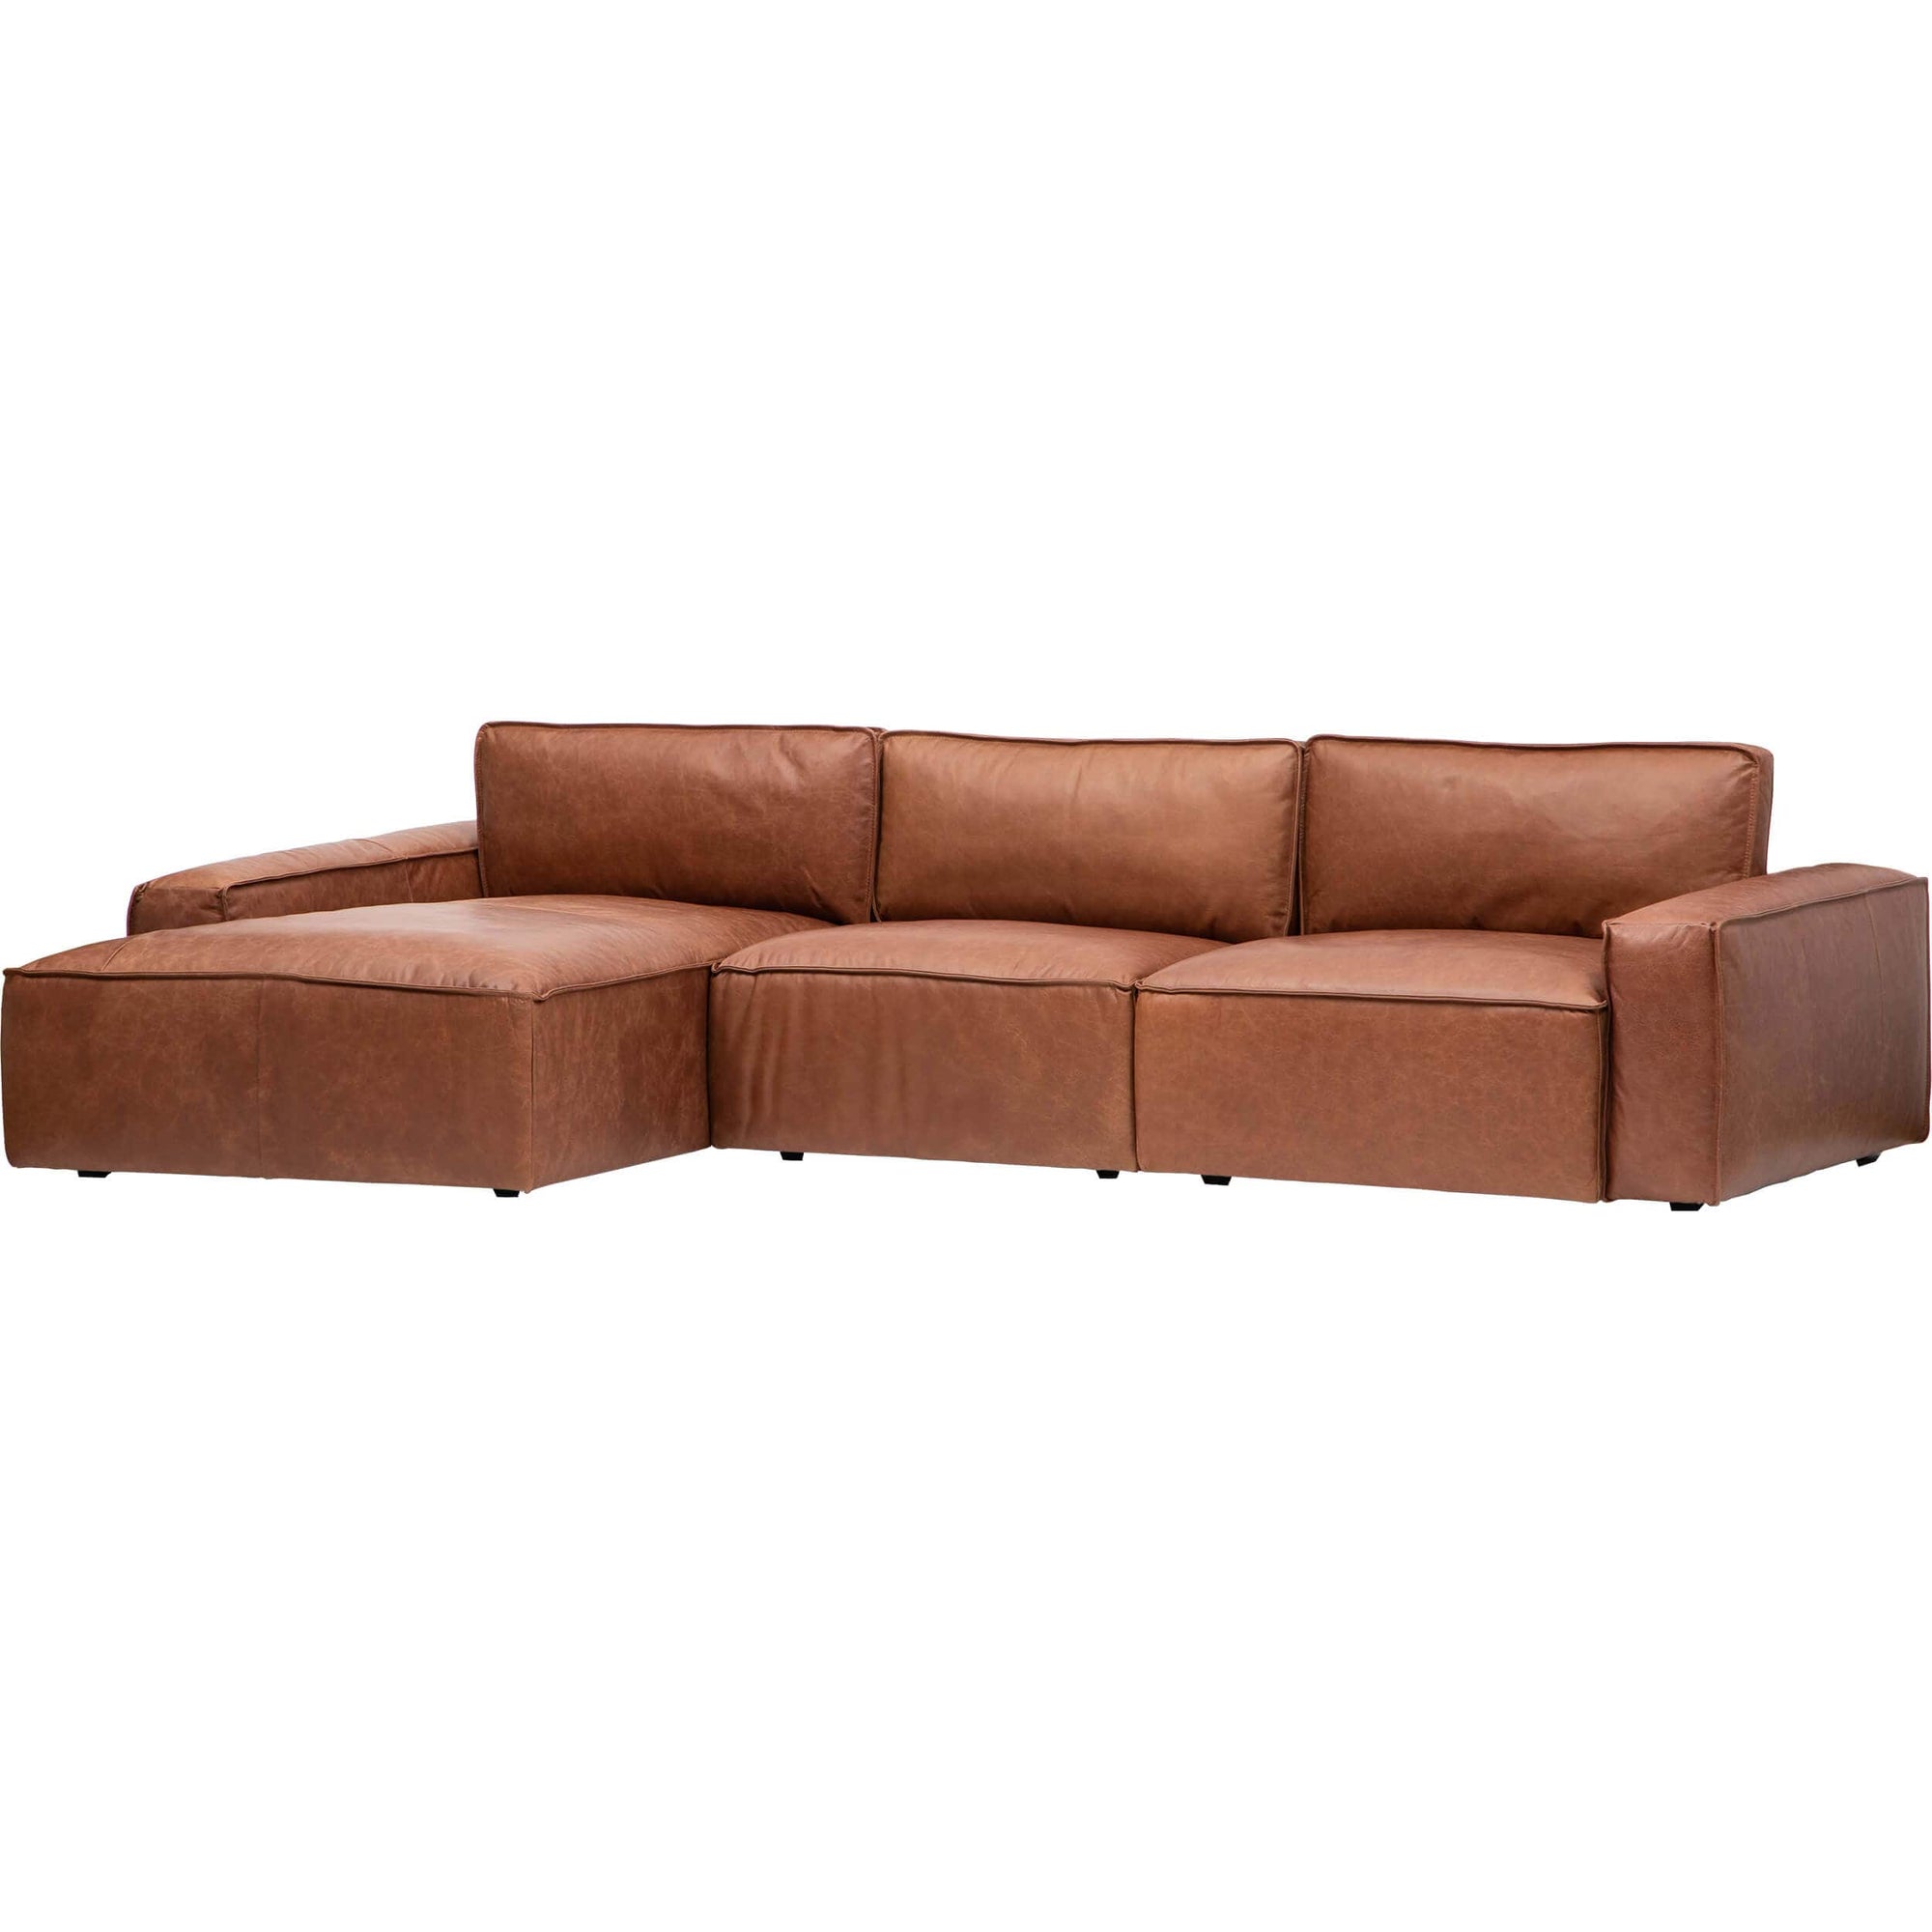 Marseille – Leather Carmel Home Zion Sectional, Fashion High